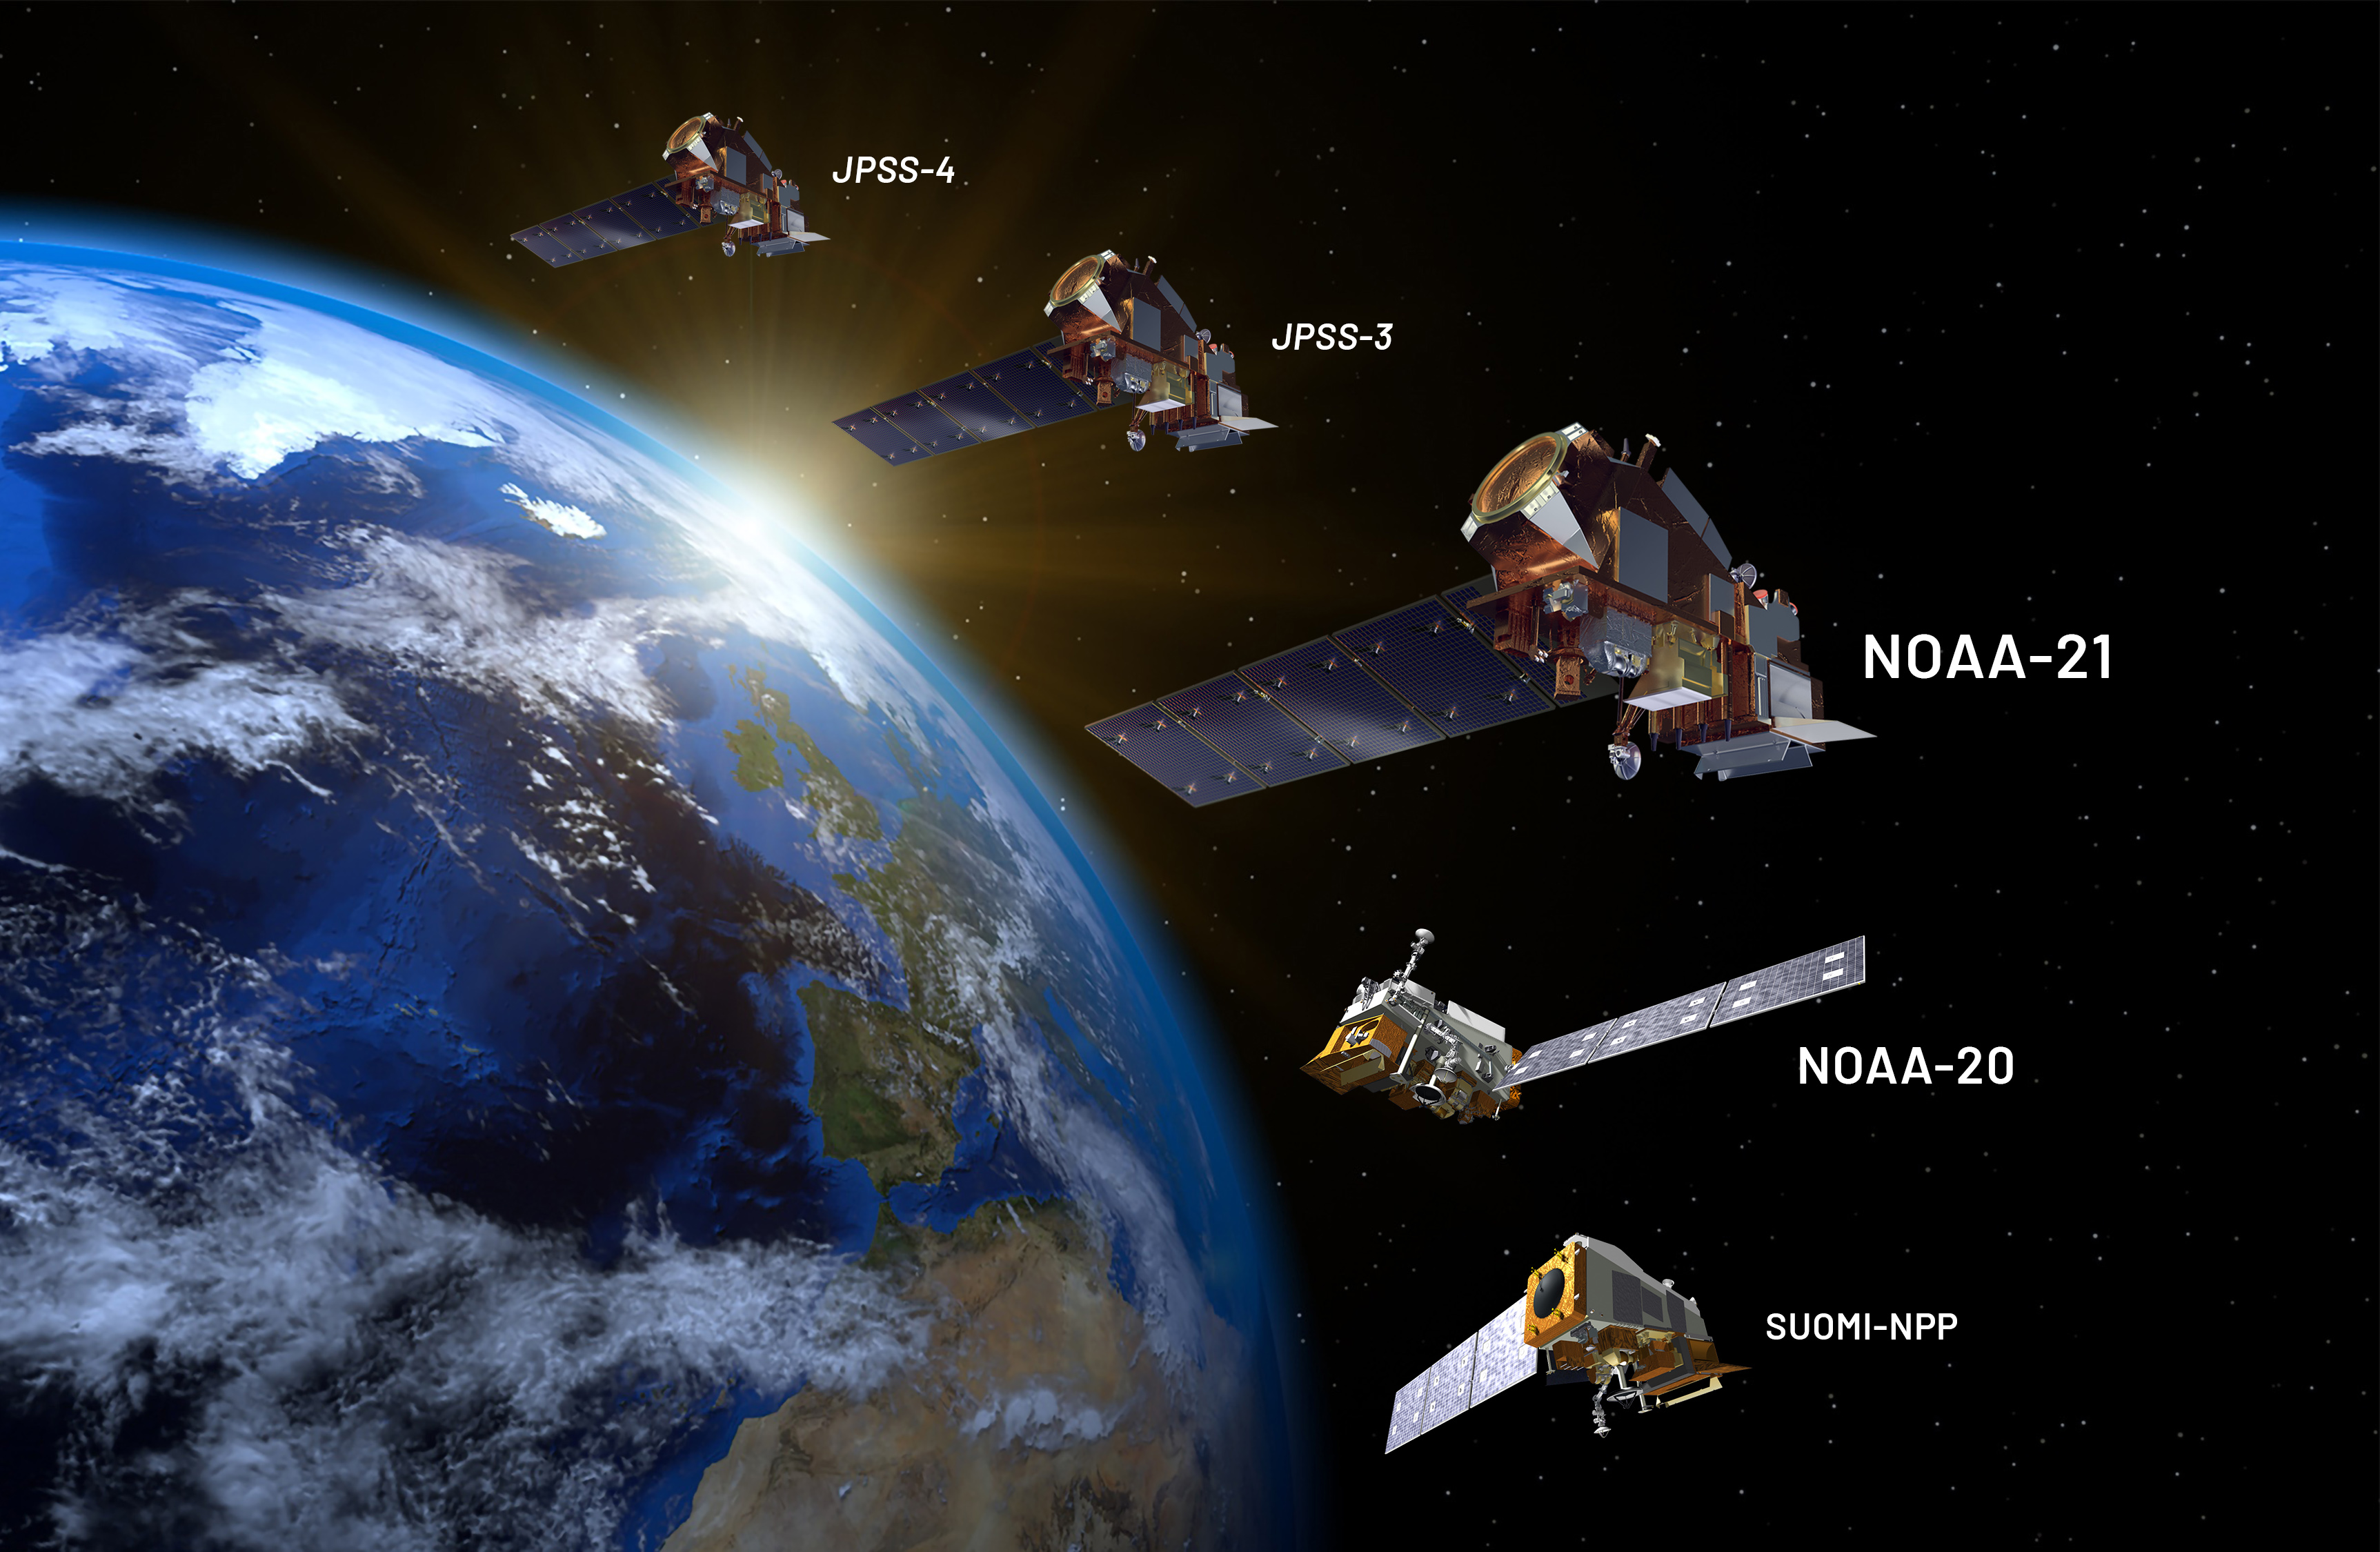 Composite illustration of the fleet of JPSS satellites in space with Earth in the background.